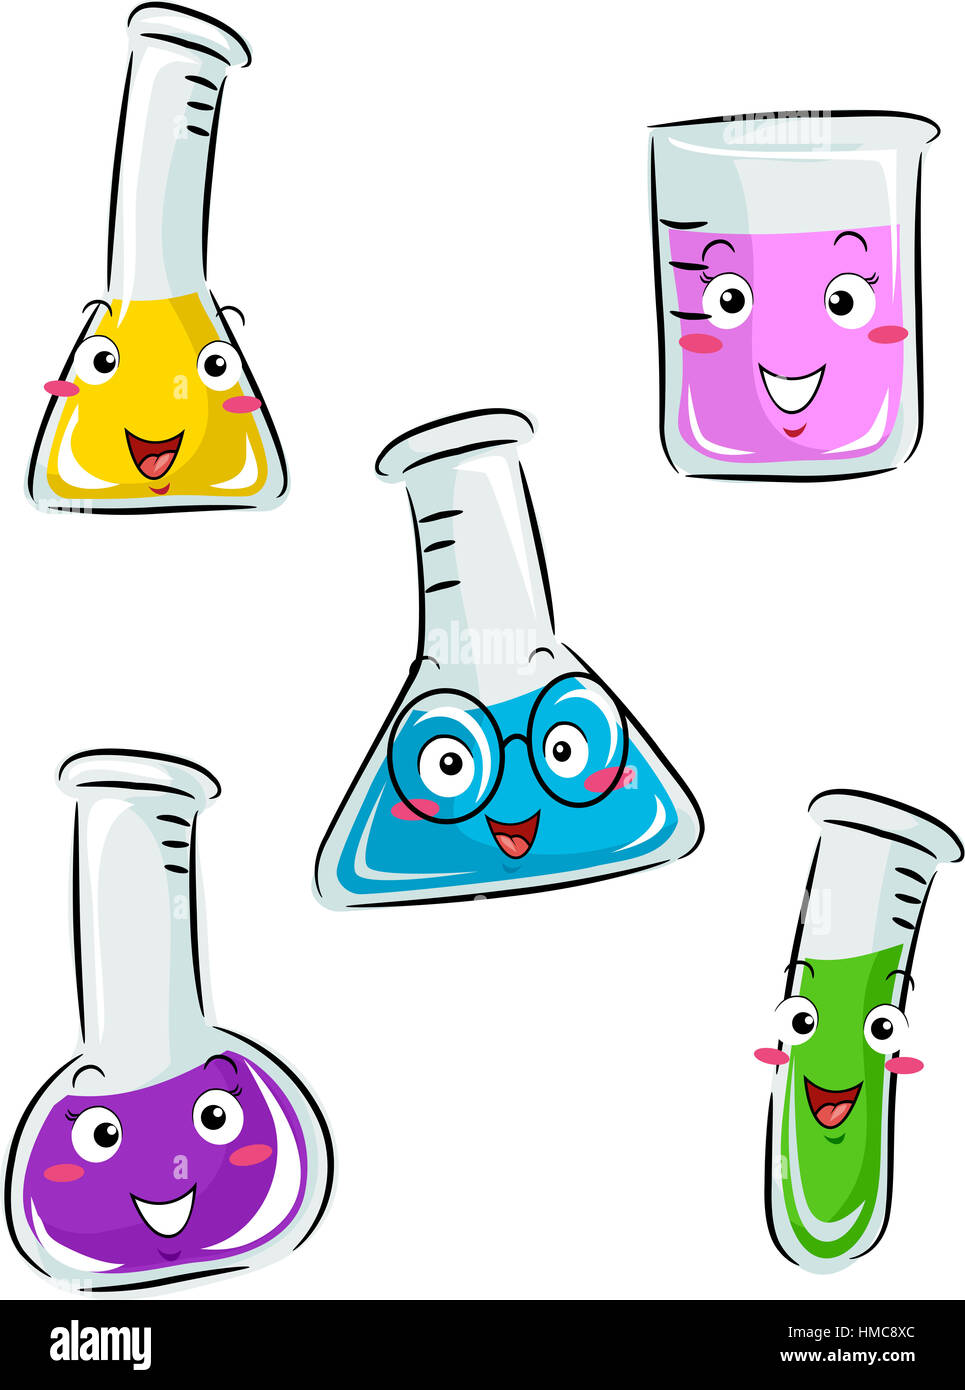 Mascot Illustration of Laboratory Tools Containing Different Chemicals Stock Photo